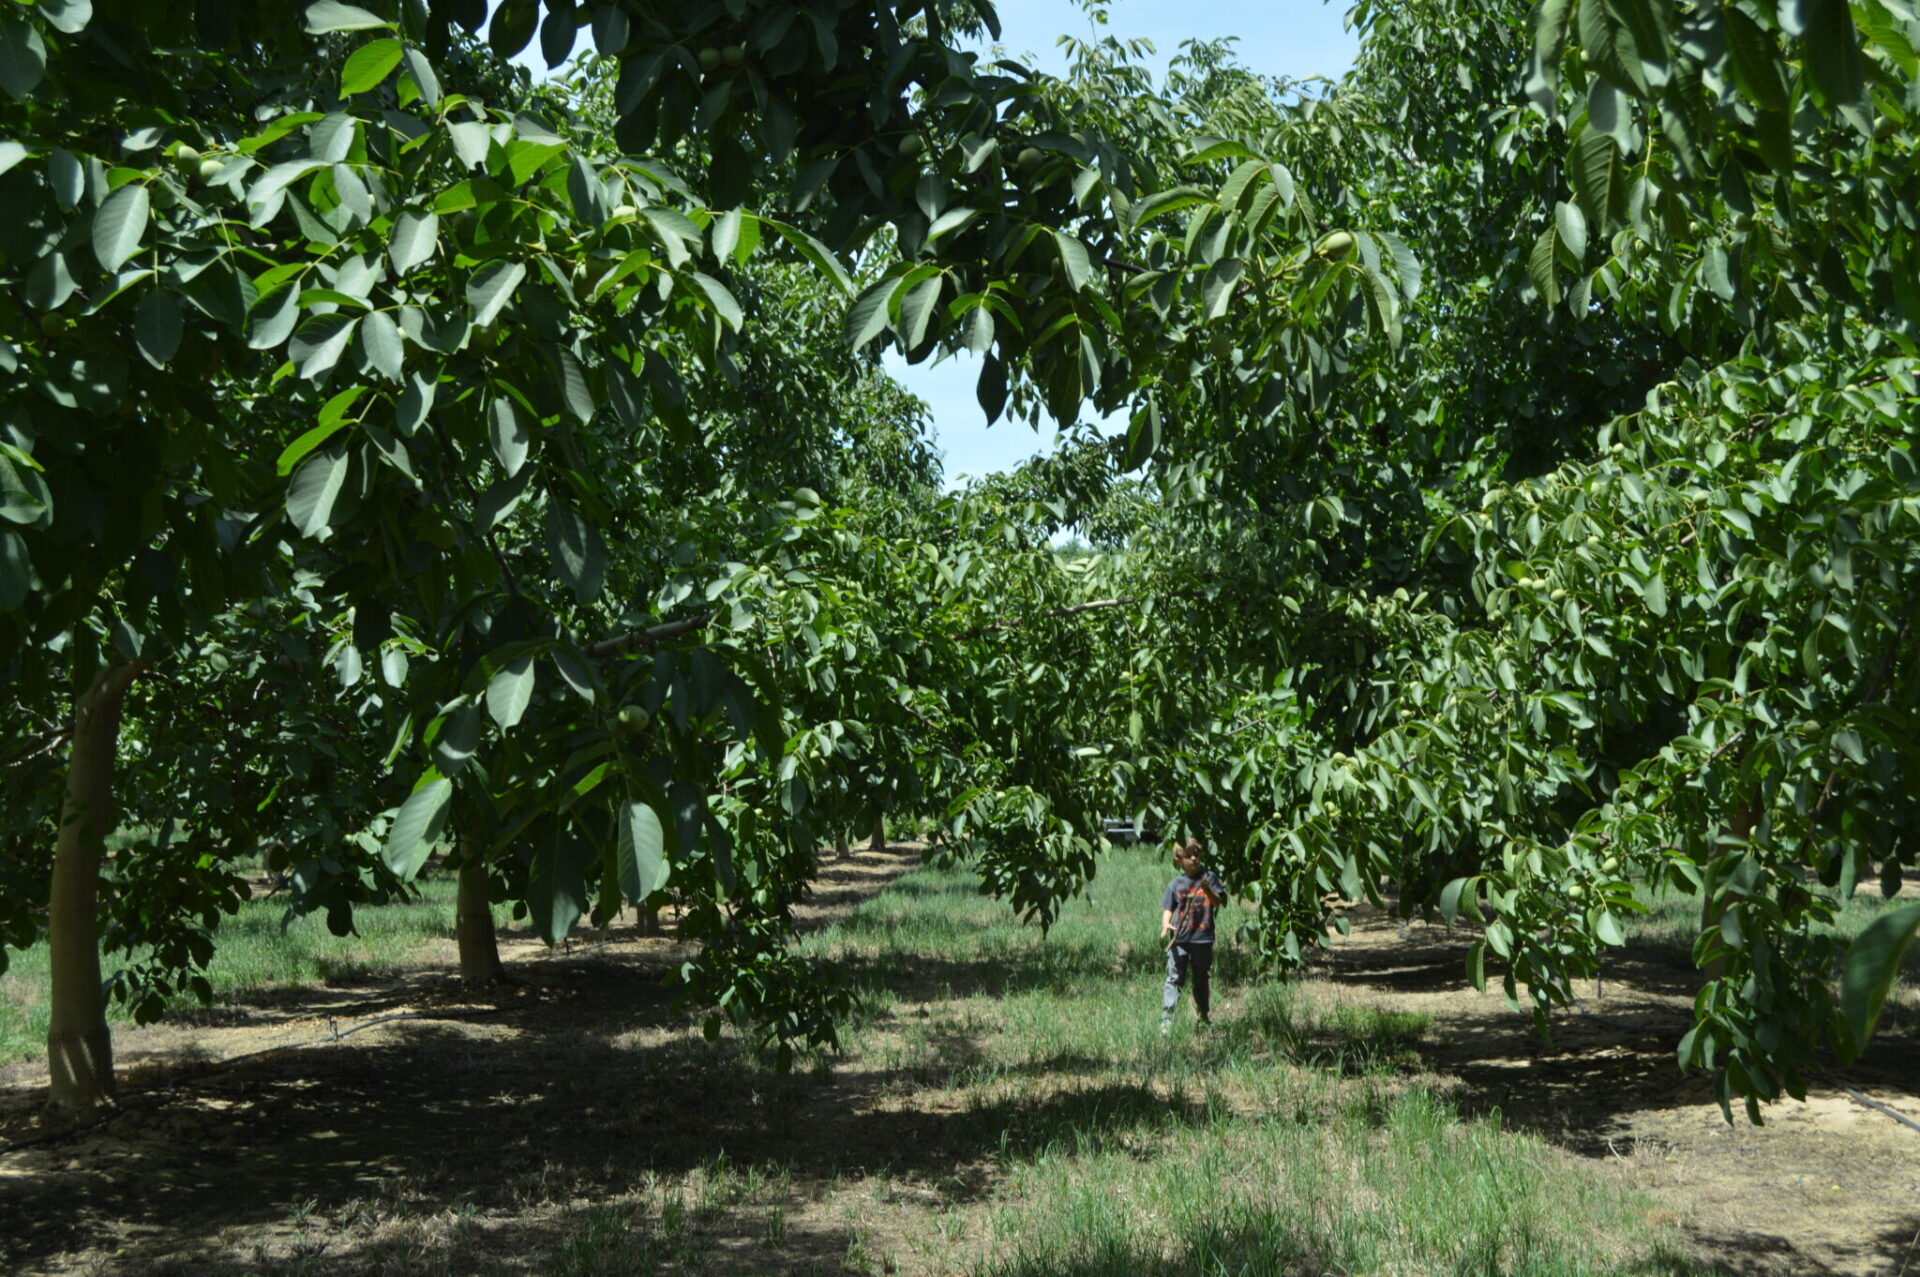 New Wolfskill Variety ‘A Good Bet’ for an Early Season Walnut | West ...